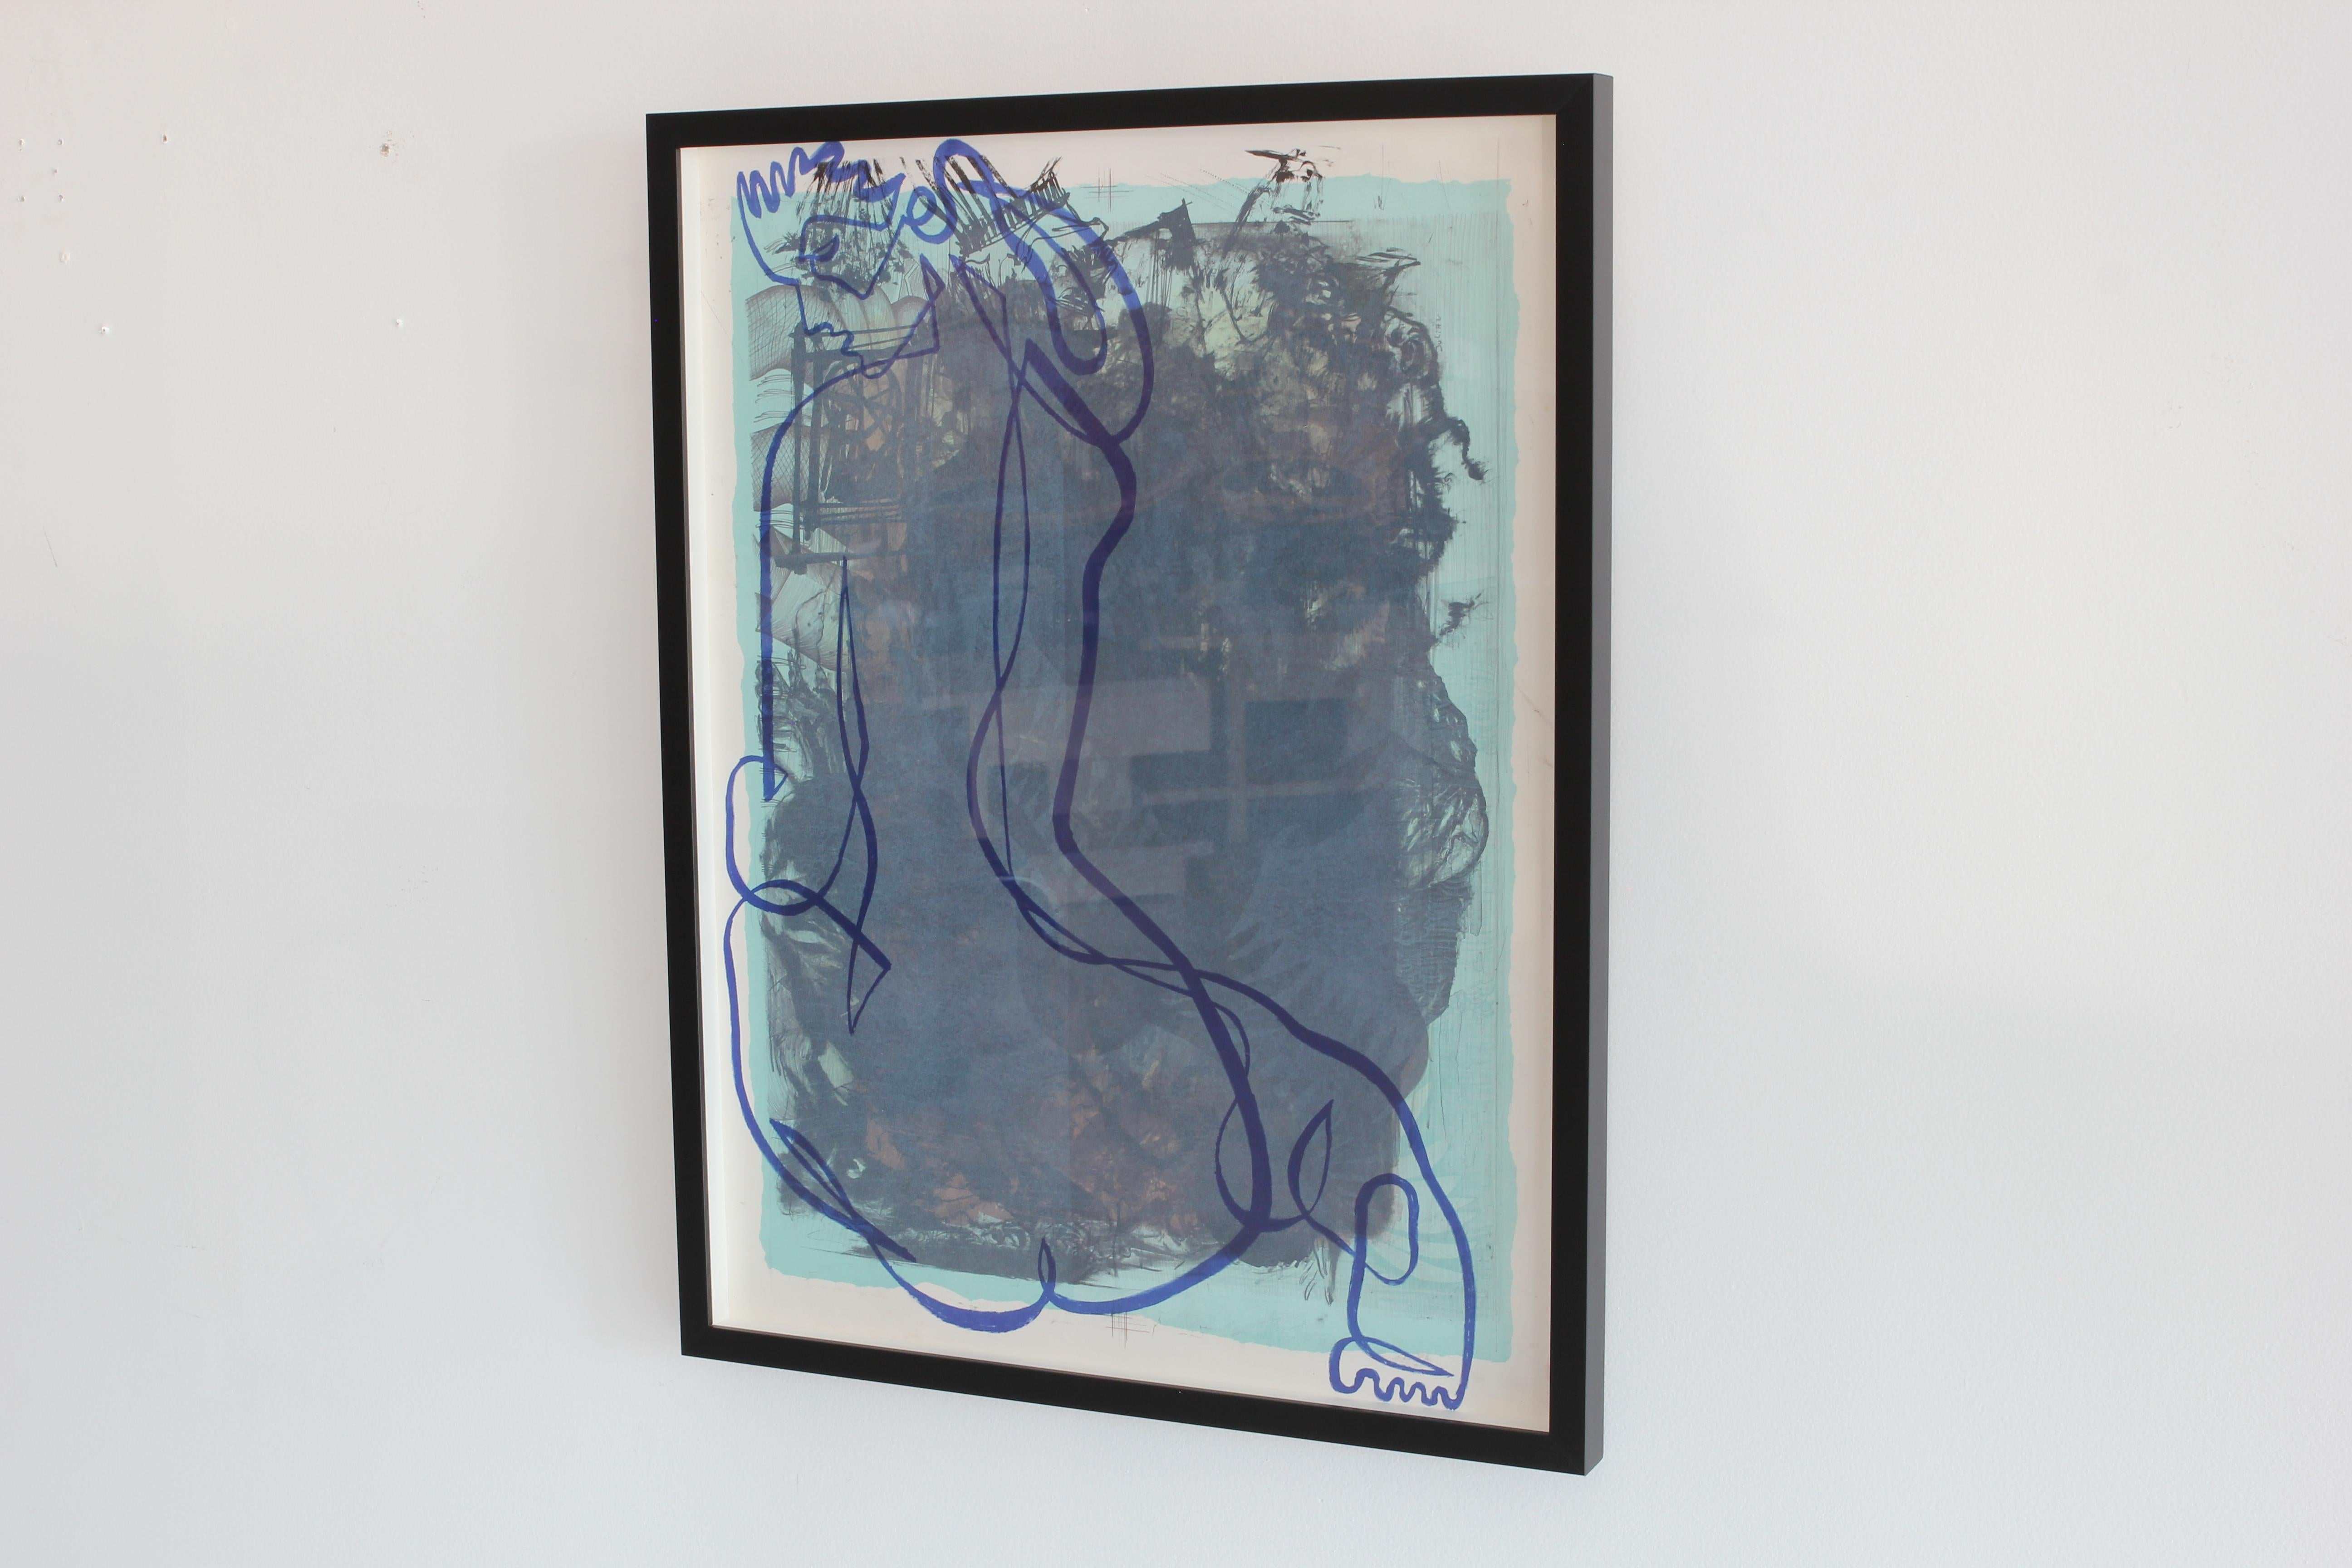 Beautiful continuous line drawing by Jean Negulesco, Oscar award winning Hollywood director. Light blue background with dark blue continuous line of a female nude. New black wood frame.